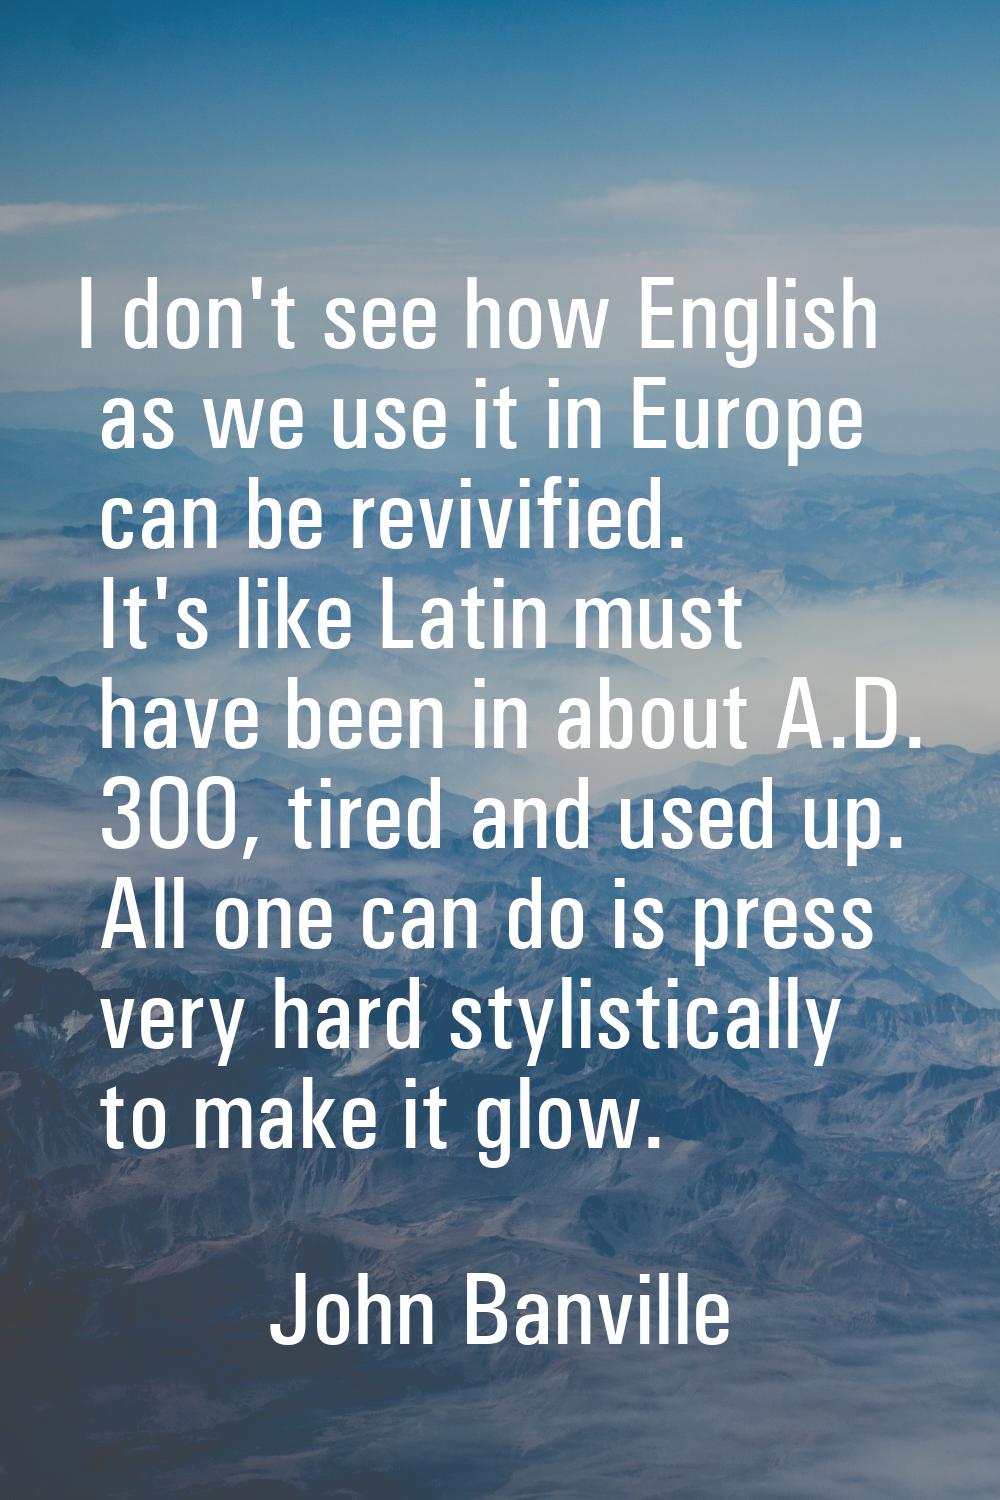 I don't see how English as we use it in Europe can be revivified. It's like Latin must have been in